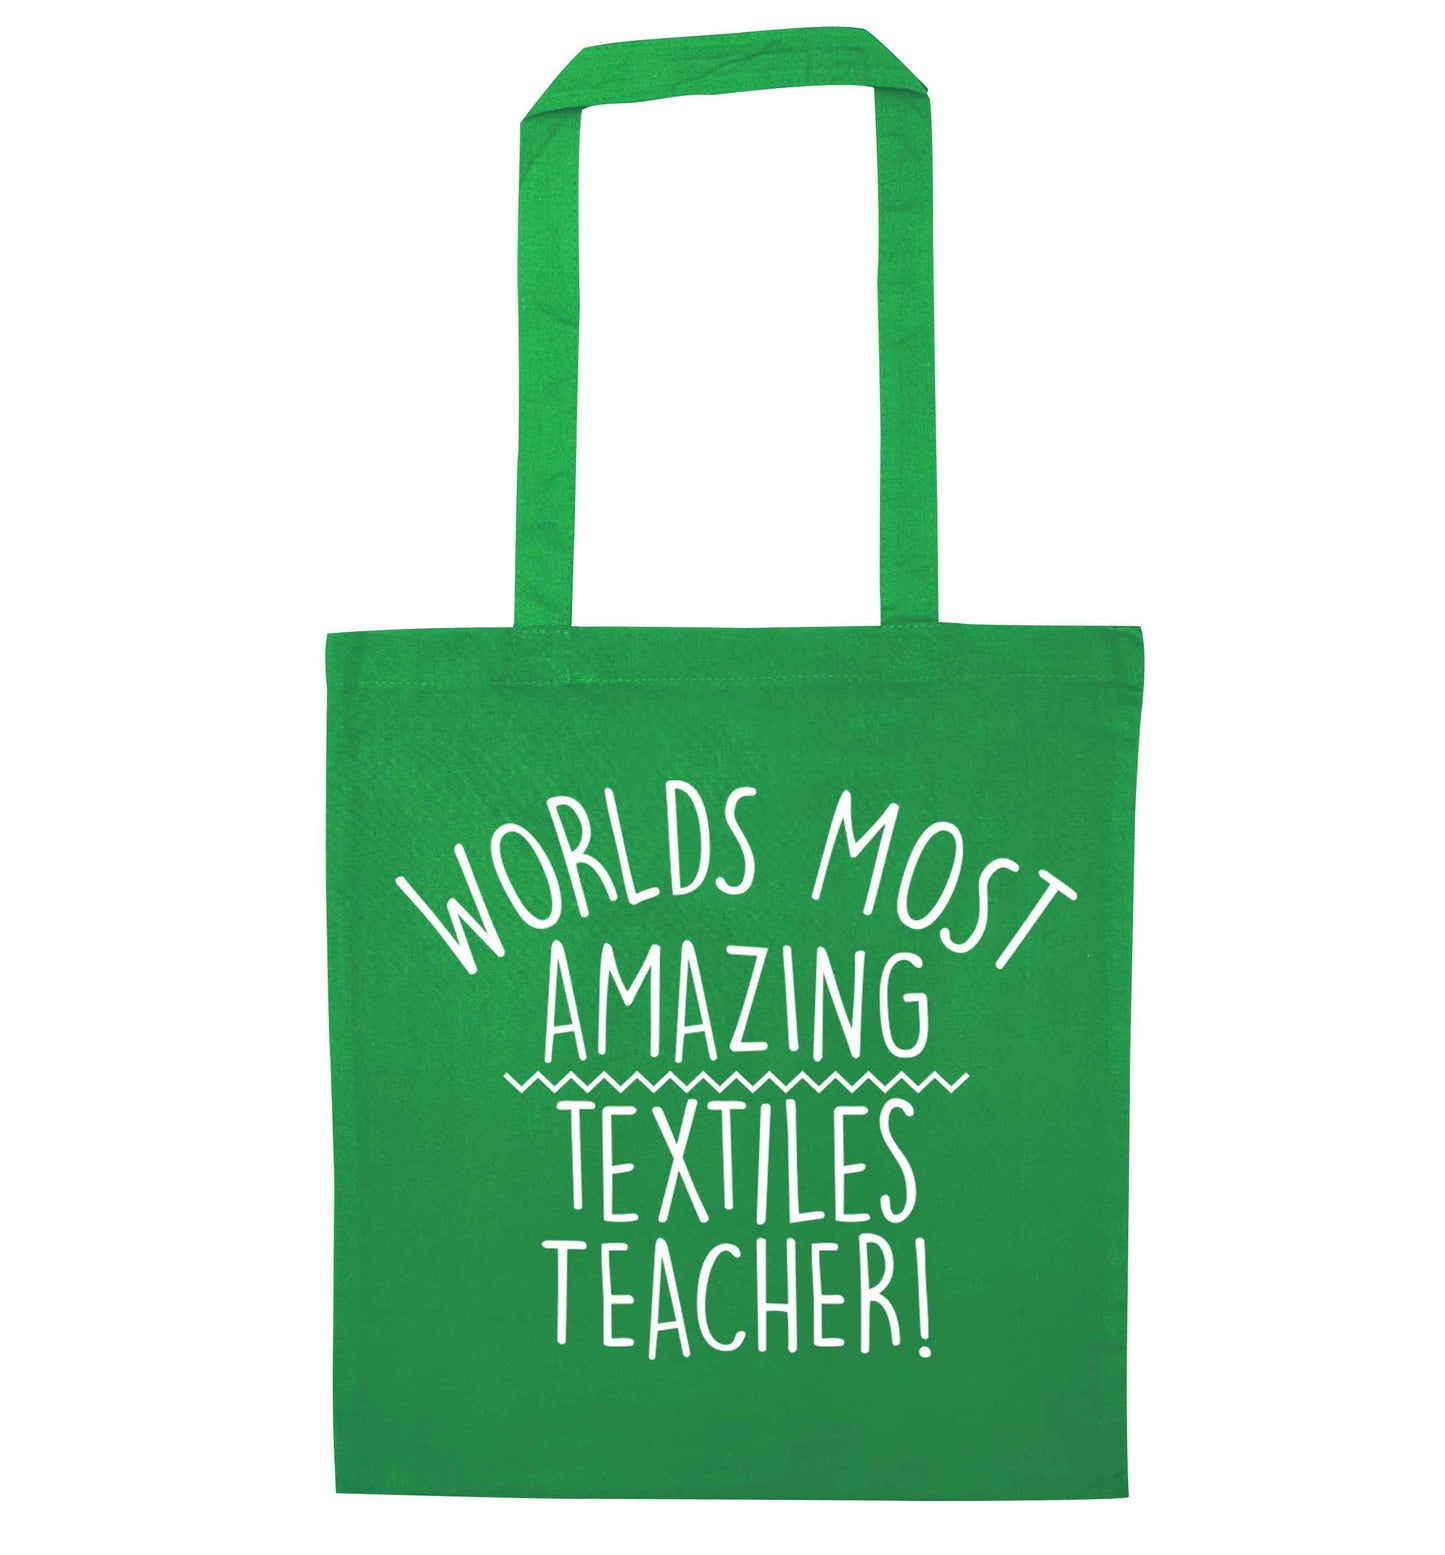 Worlds most amazing textiles teacher green tote bag